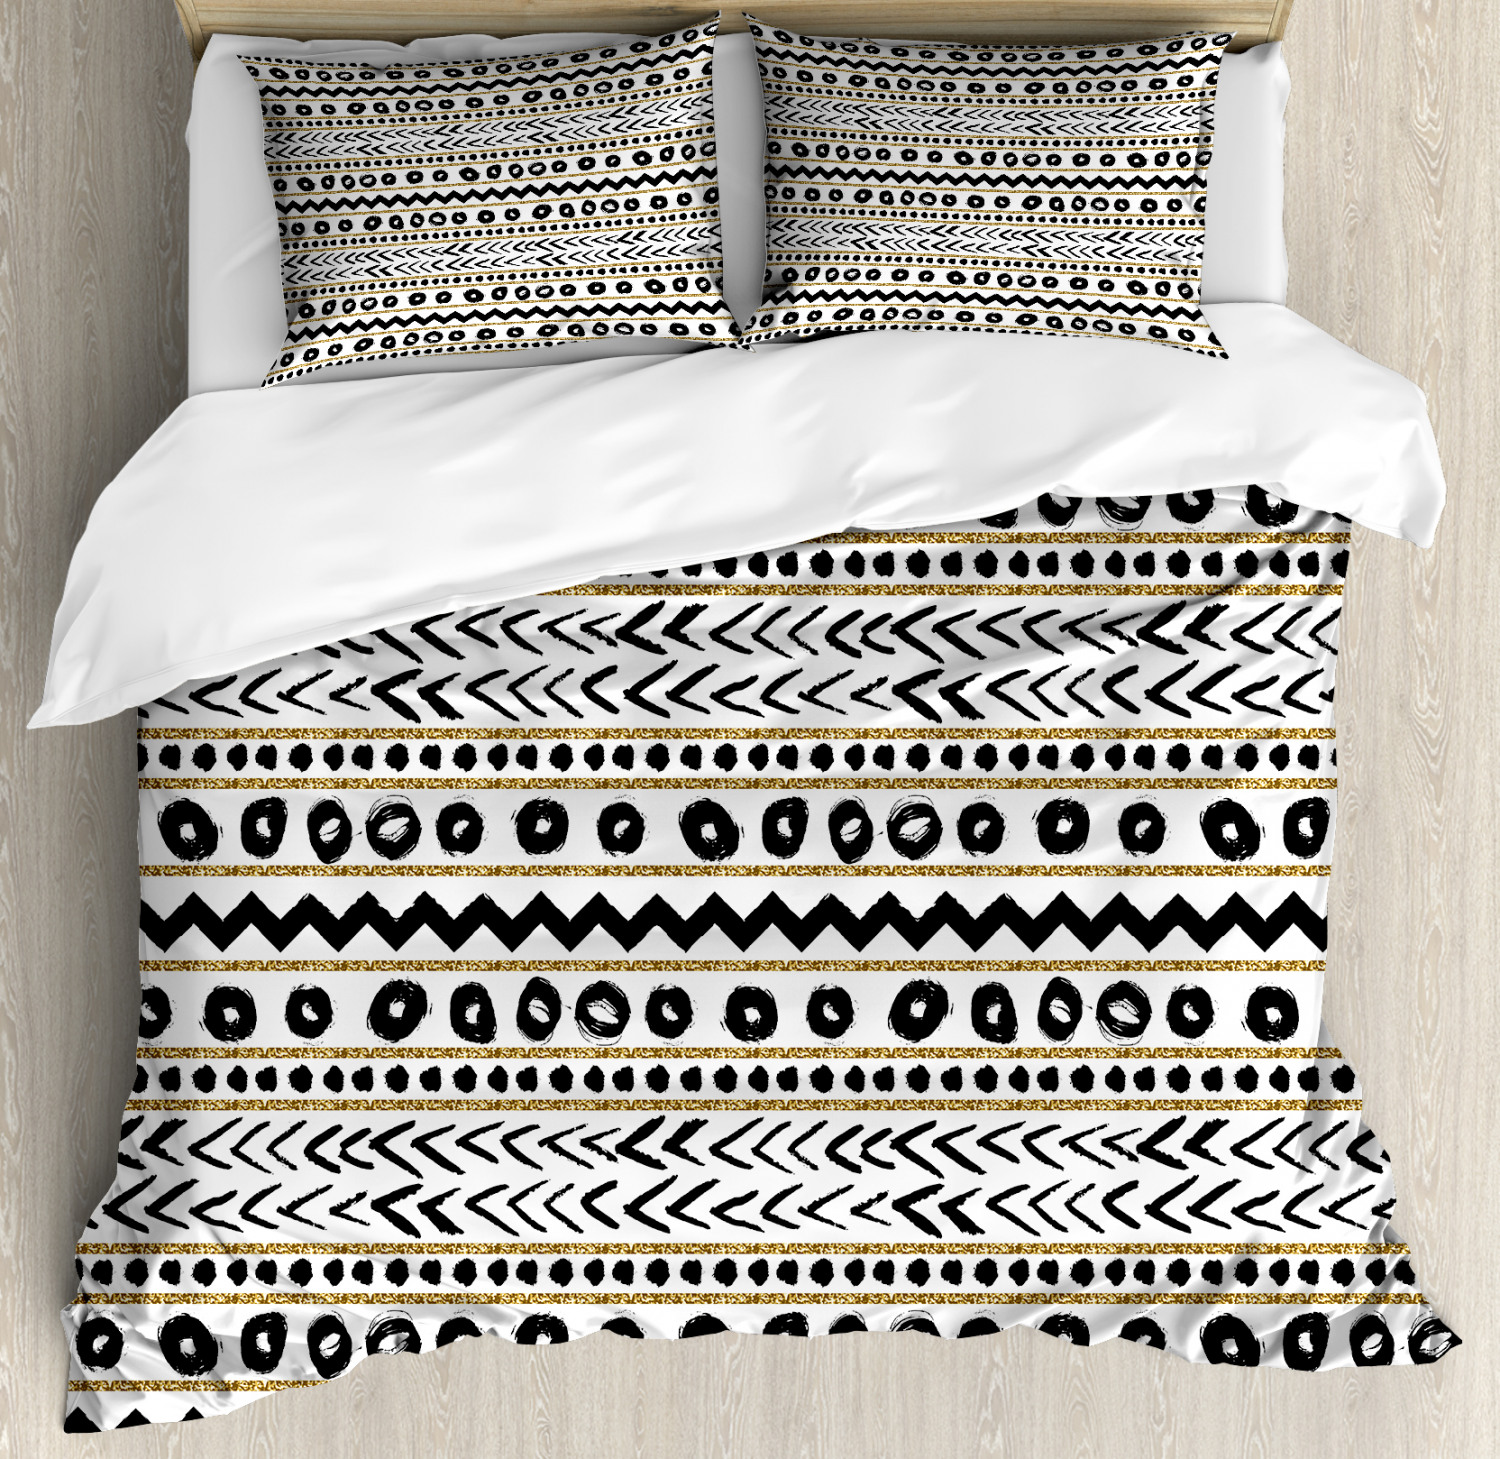 Boho Duvet Cover Set With Pillow Shams Abstract Primitive Figures